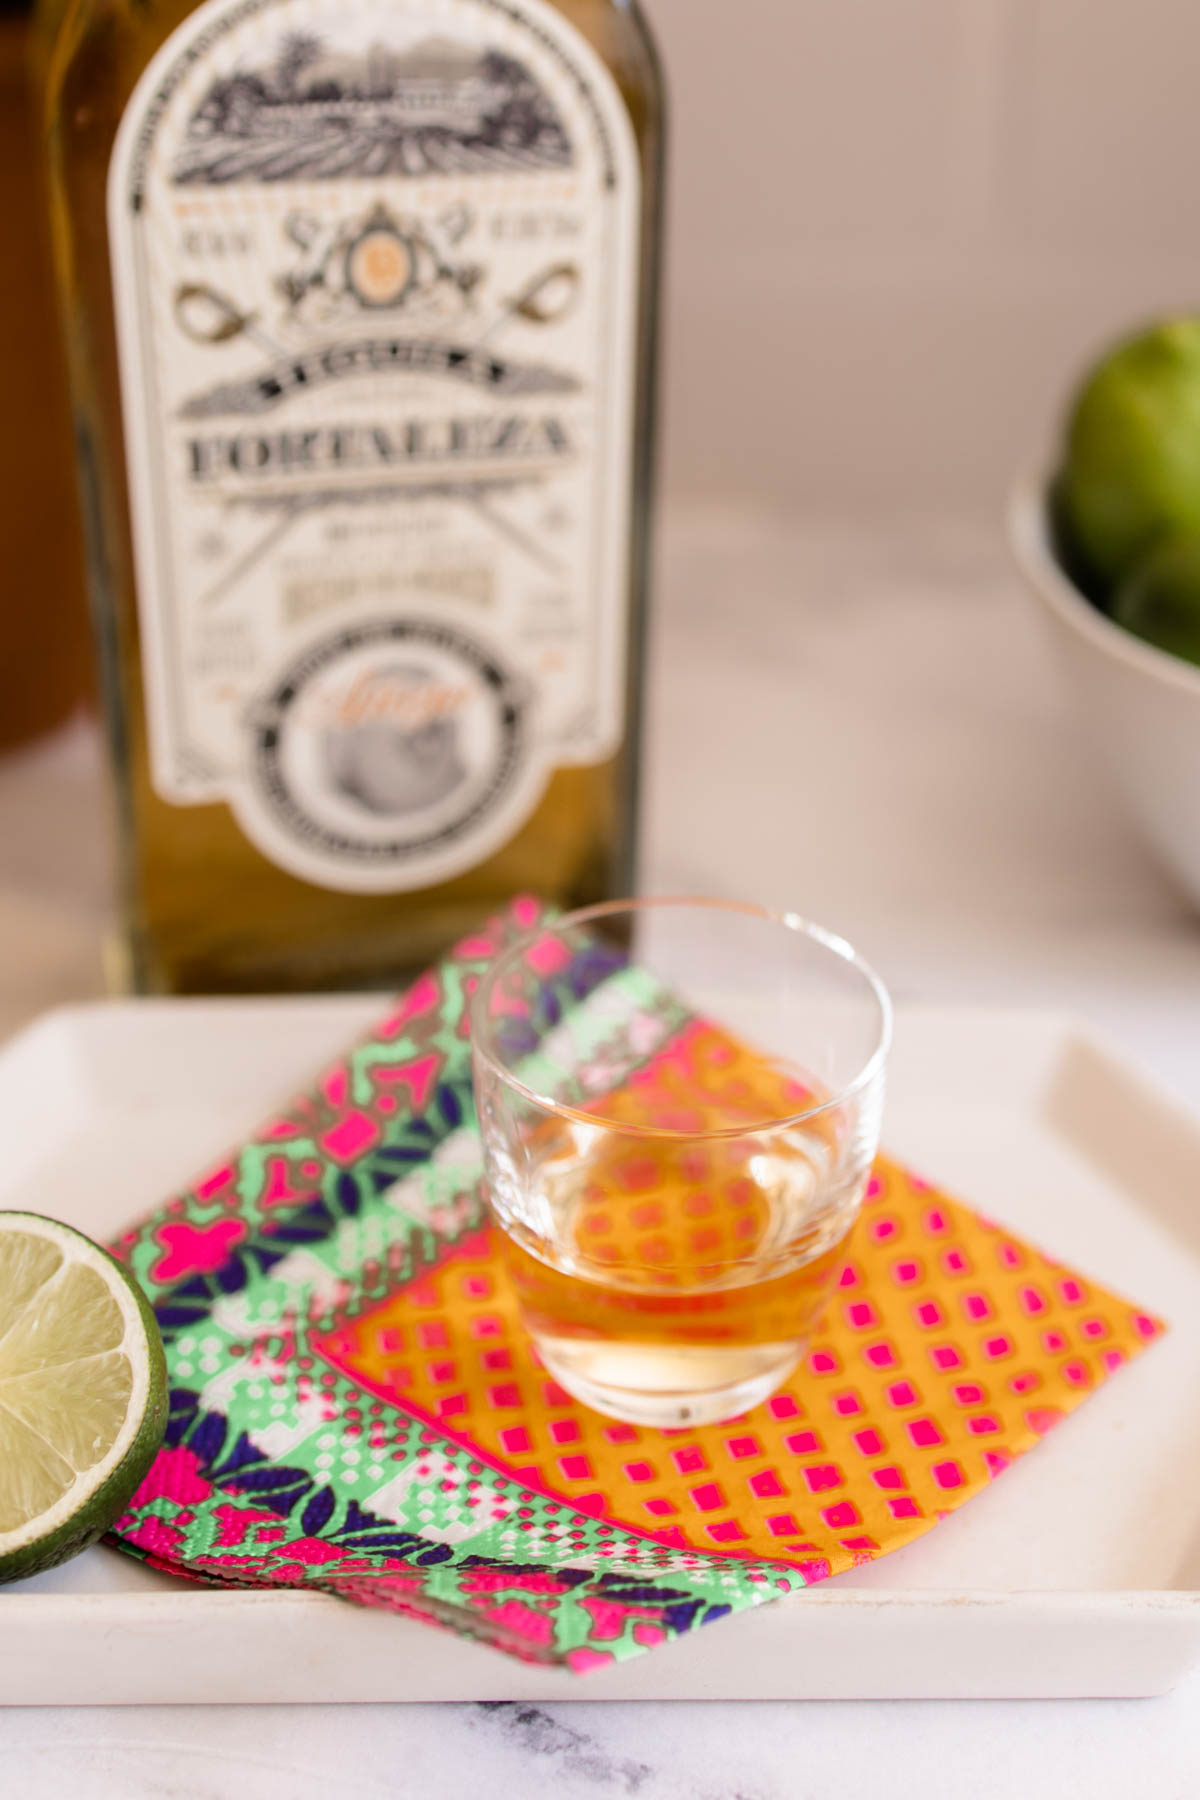 A glass on a colored napkin in front of a bottle of Fortaleza Tequila Anejo.